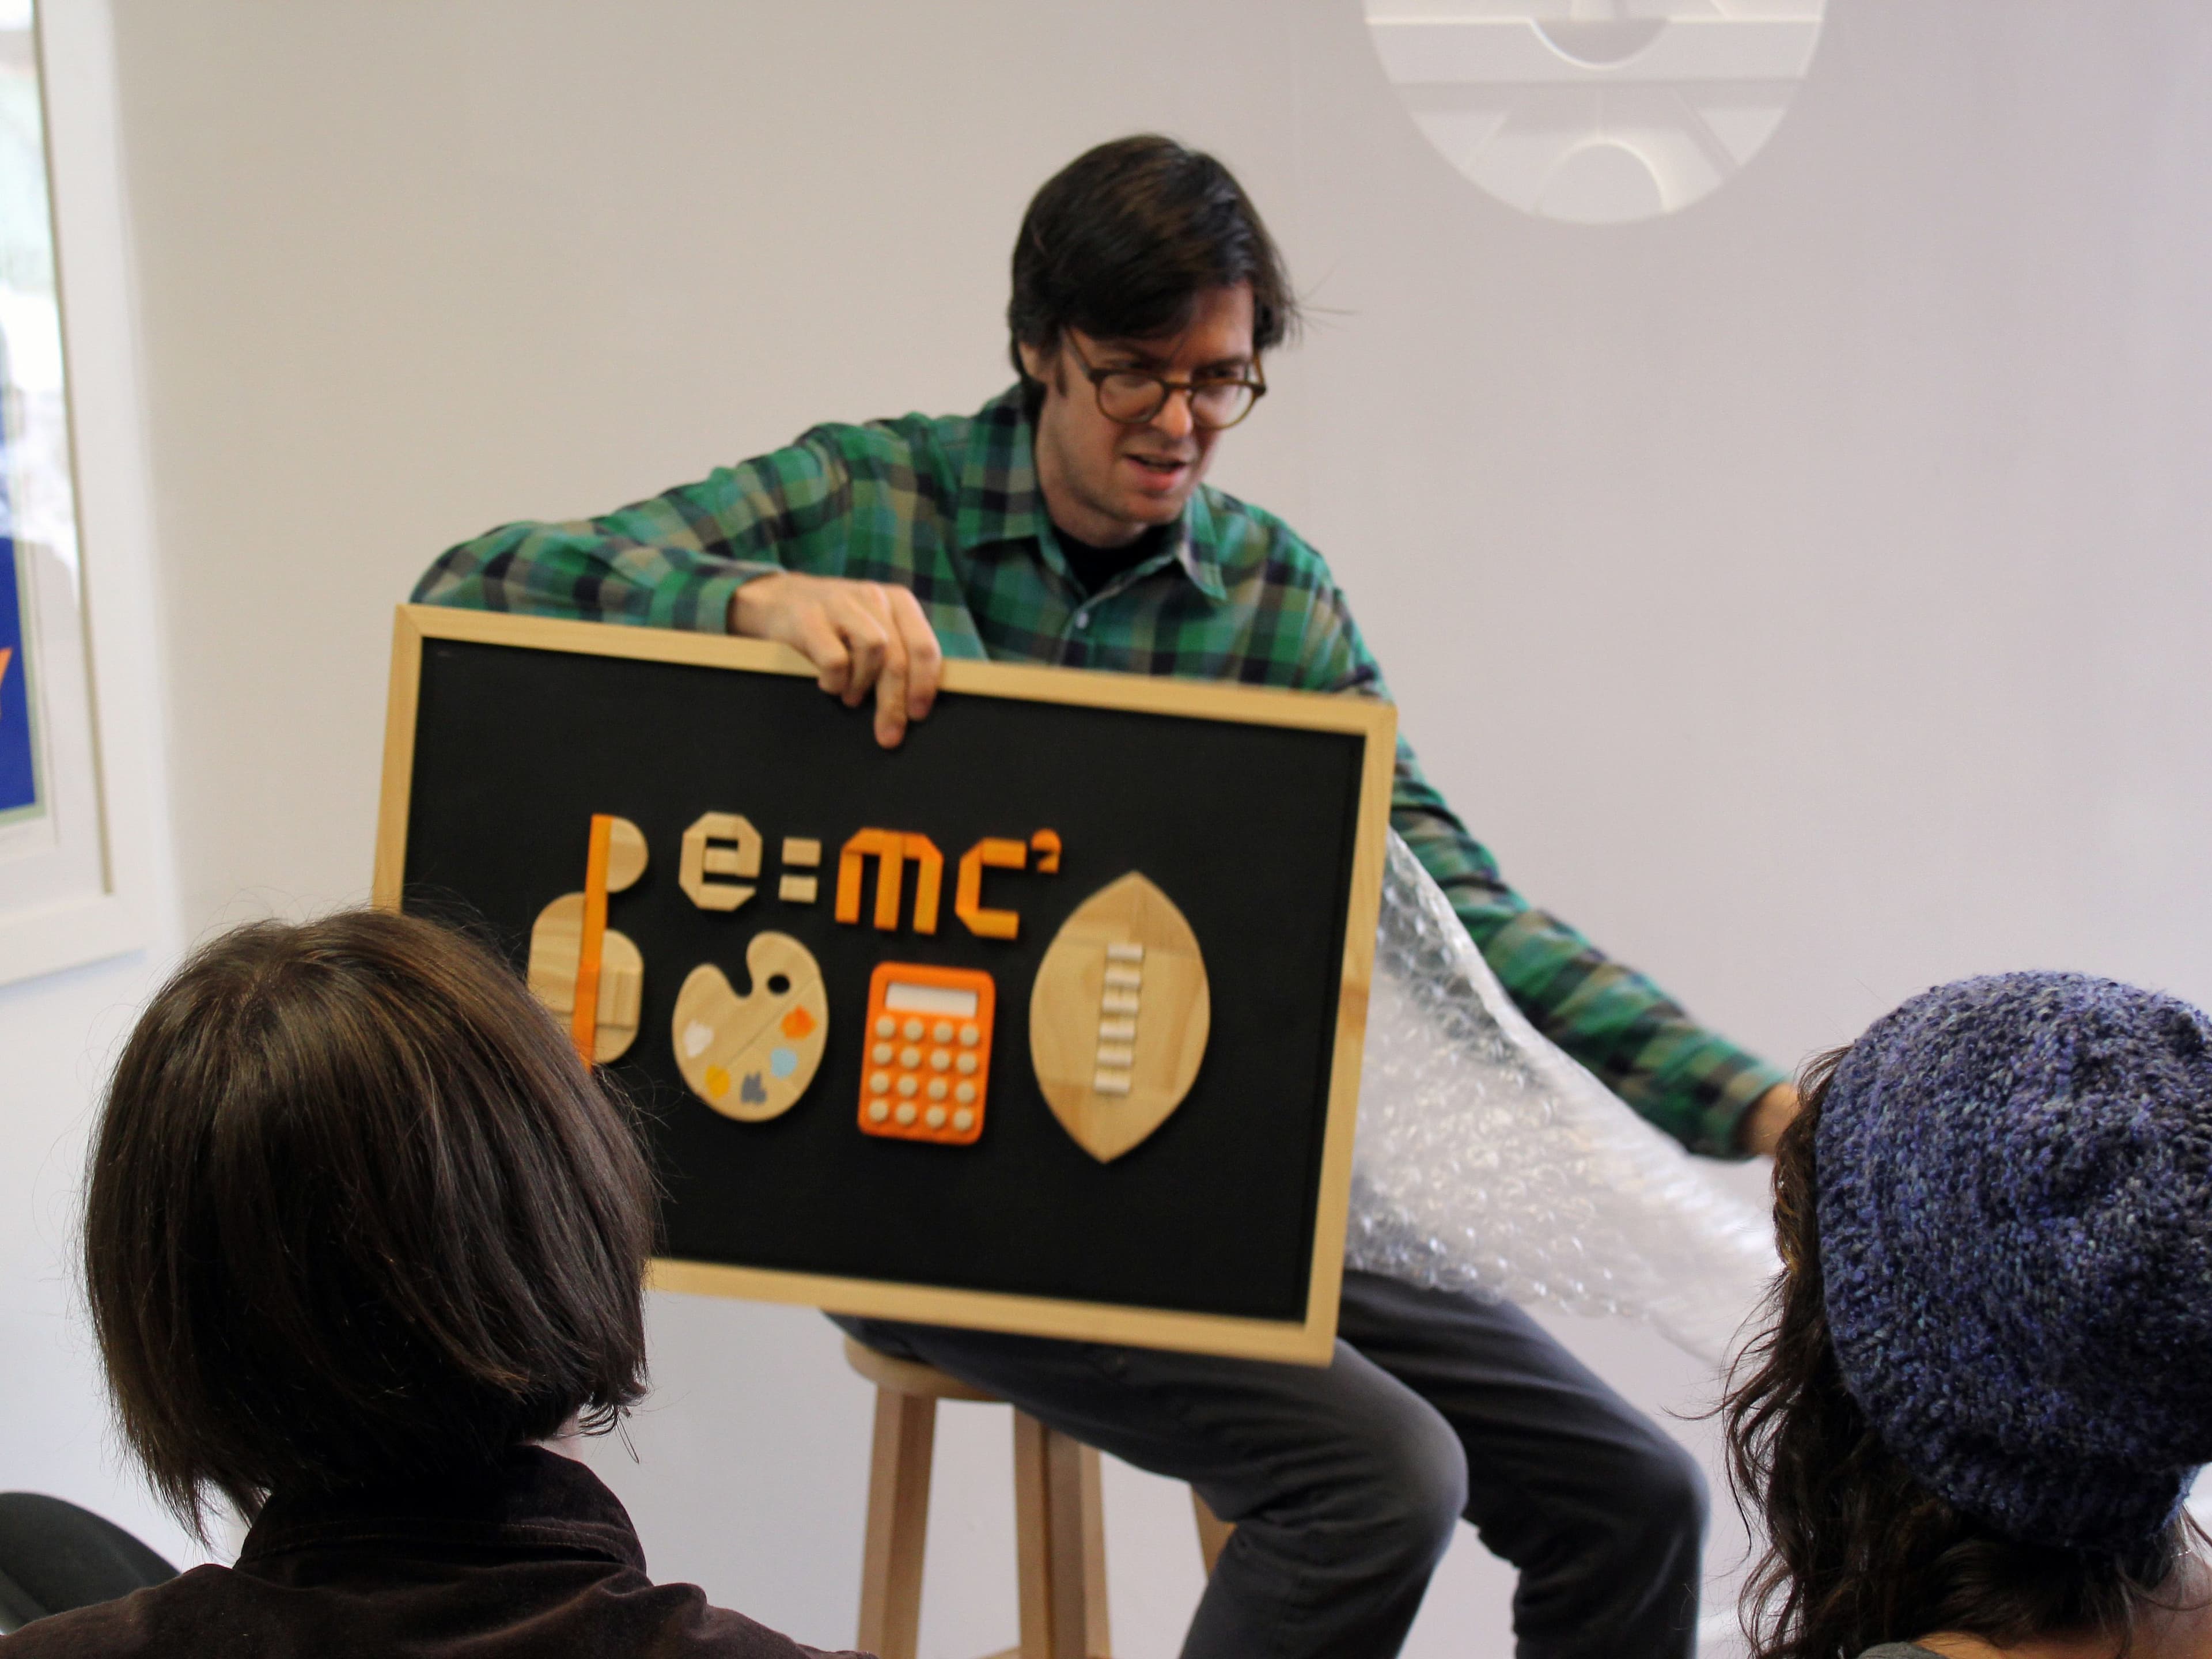 A person in a green plaid shirt sits on a stool and holds a sign with various mathematical symbols, including E=mc². They are talking to an audience, with three people visibly listening, two with their backs to the camera, one partially seen in front.